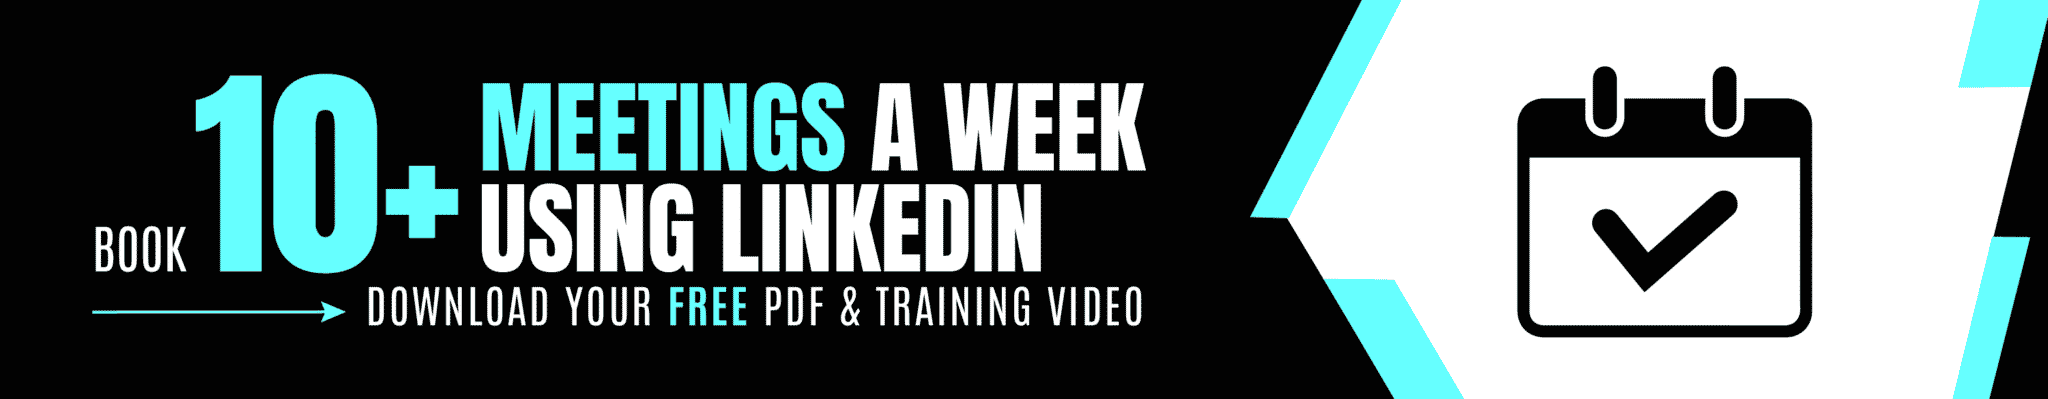 How to book 10+ Meetings From LinkedIn